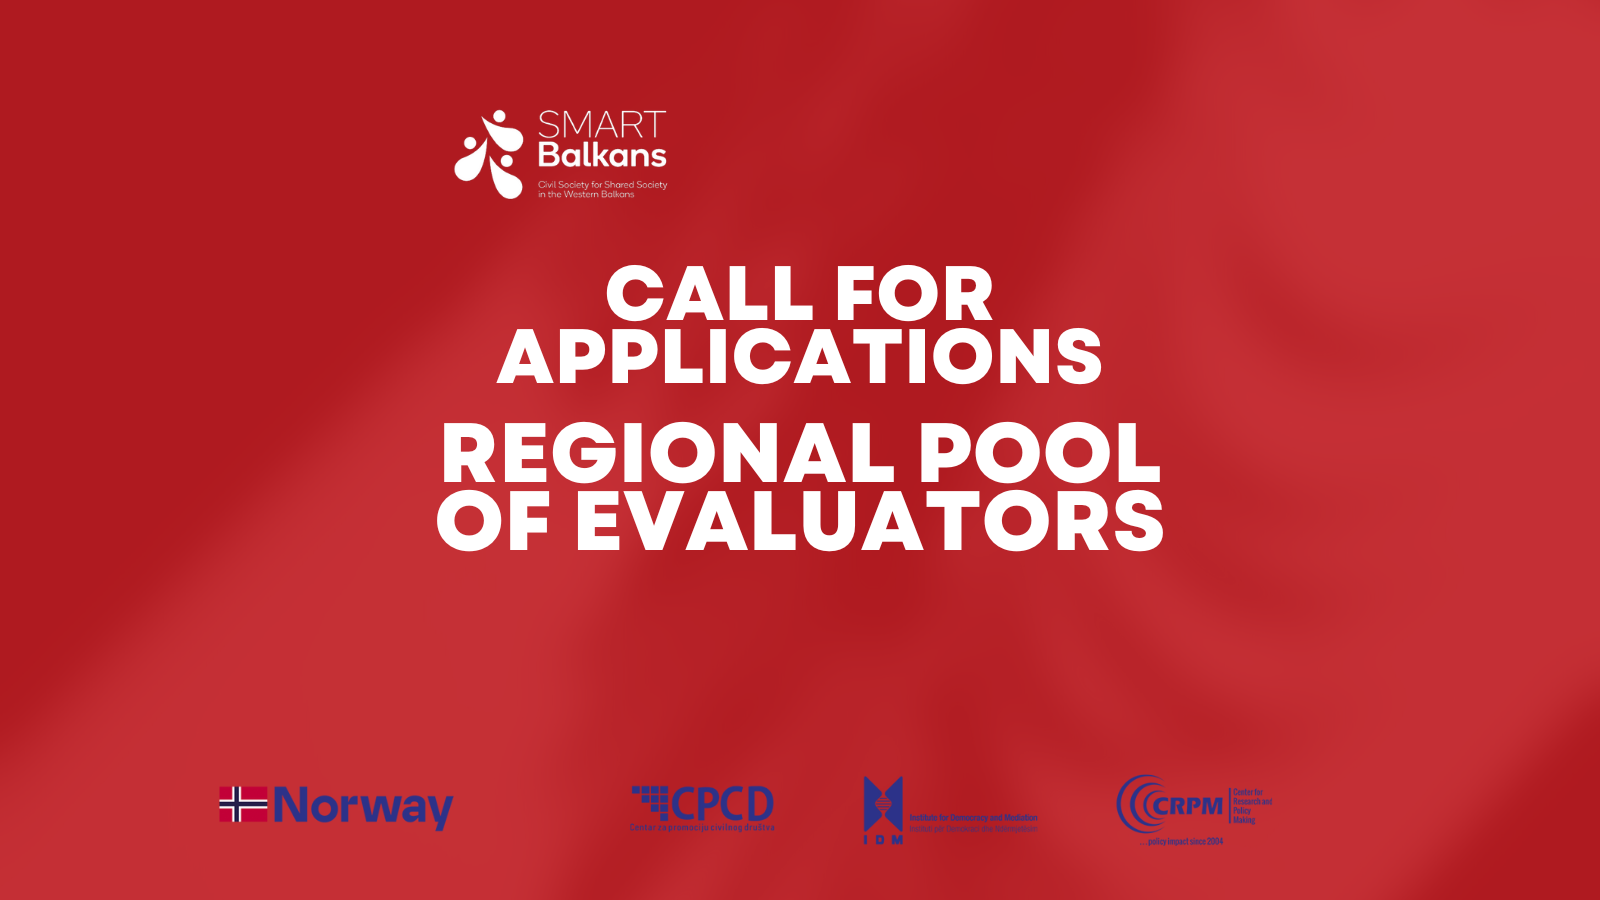 Call for Applications for Regional Pool of Evaluators